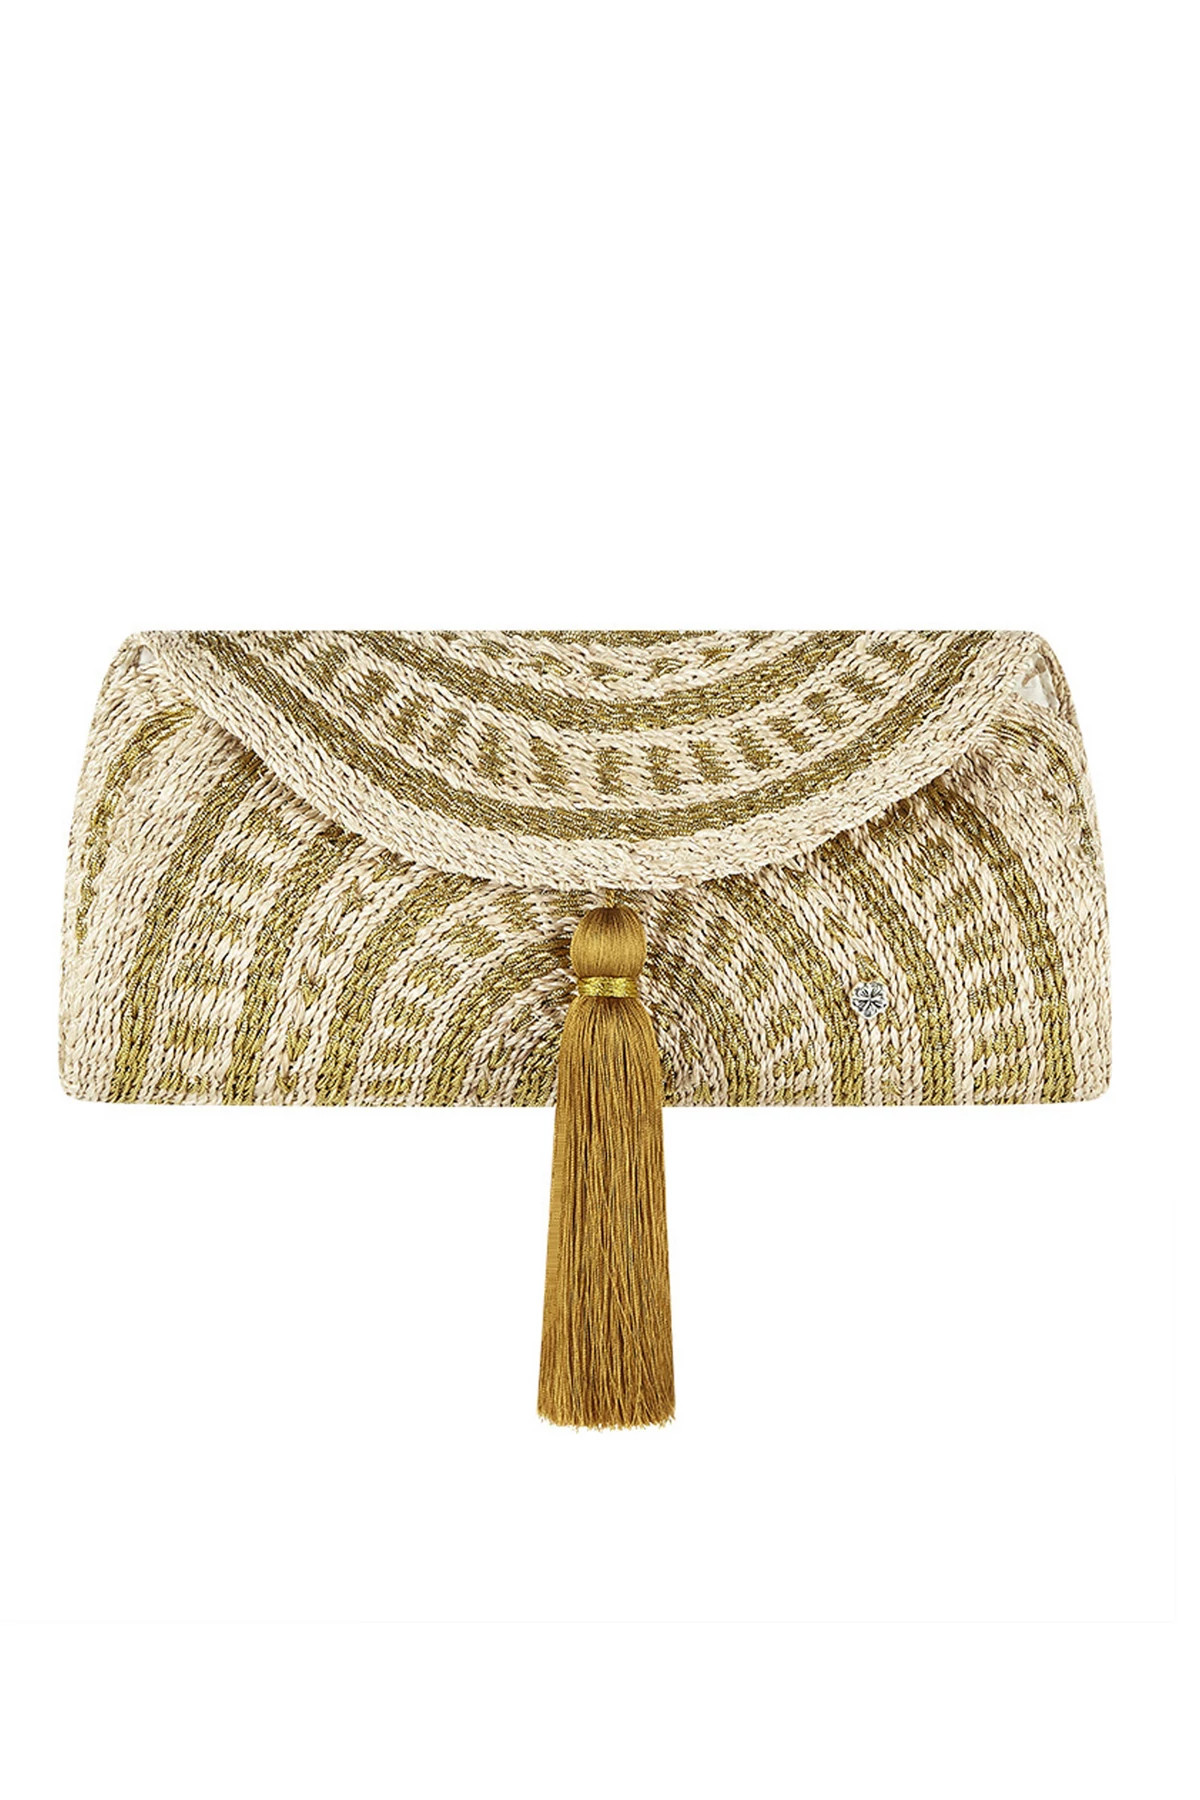 NATURAL/GOLD Navagio Clutch image number 1